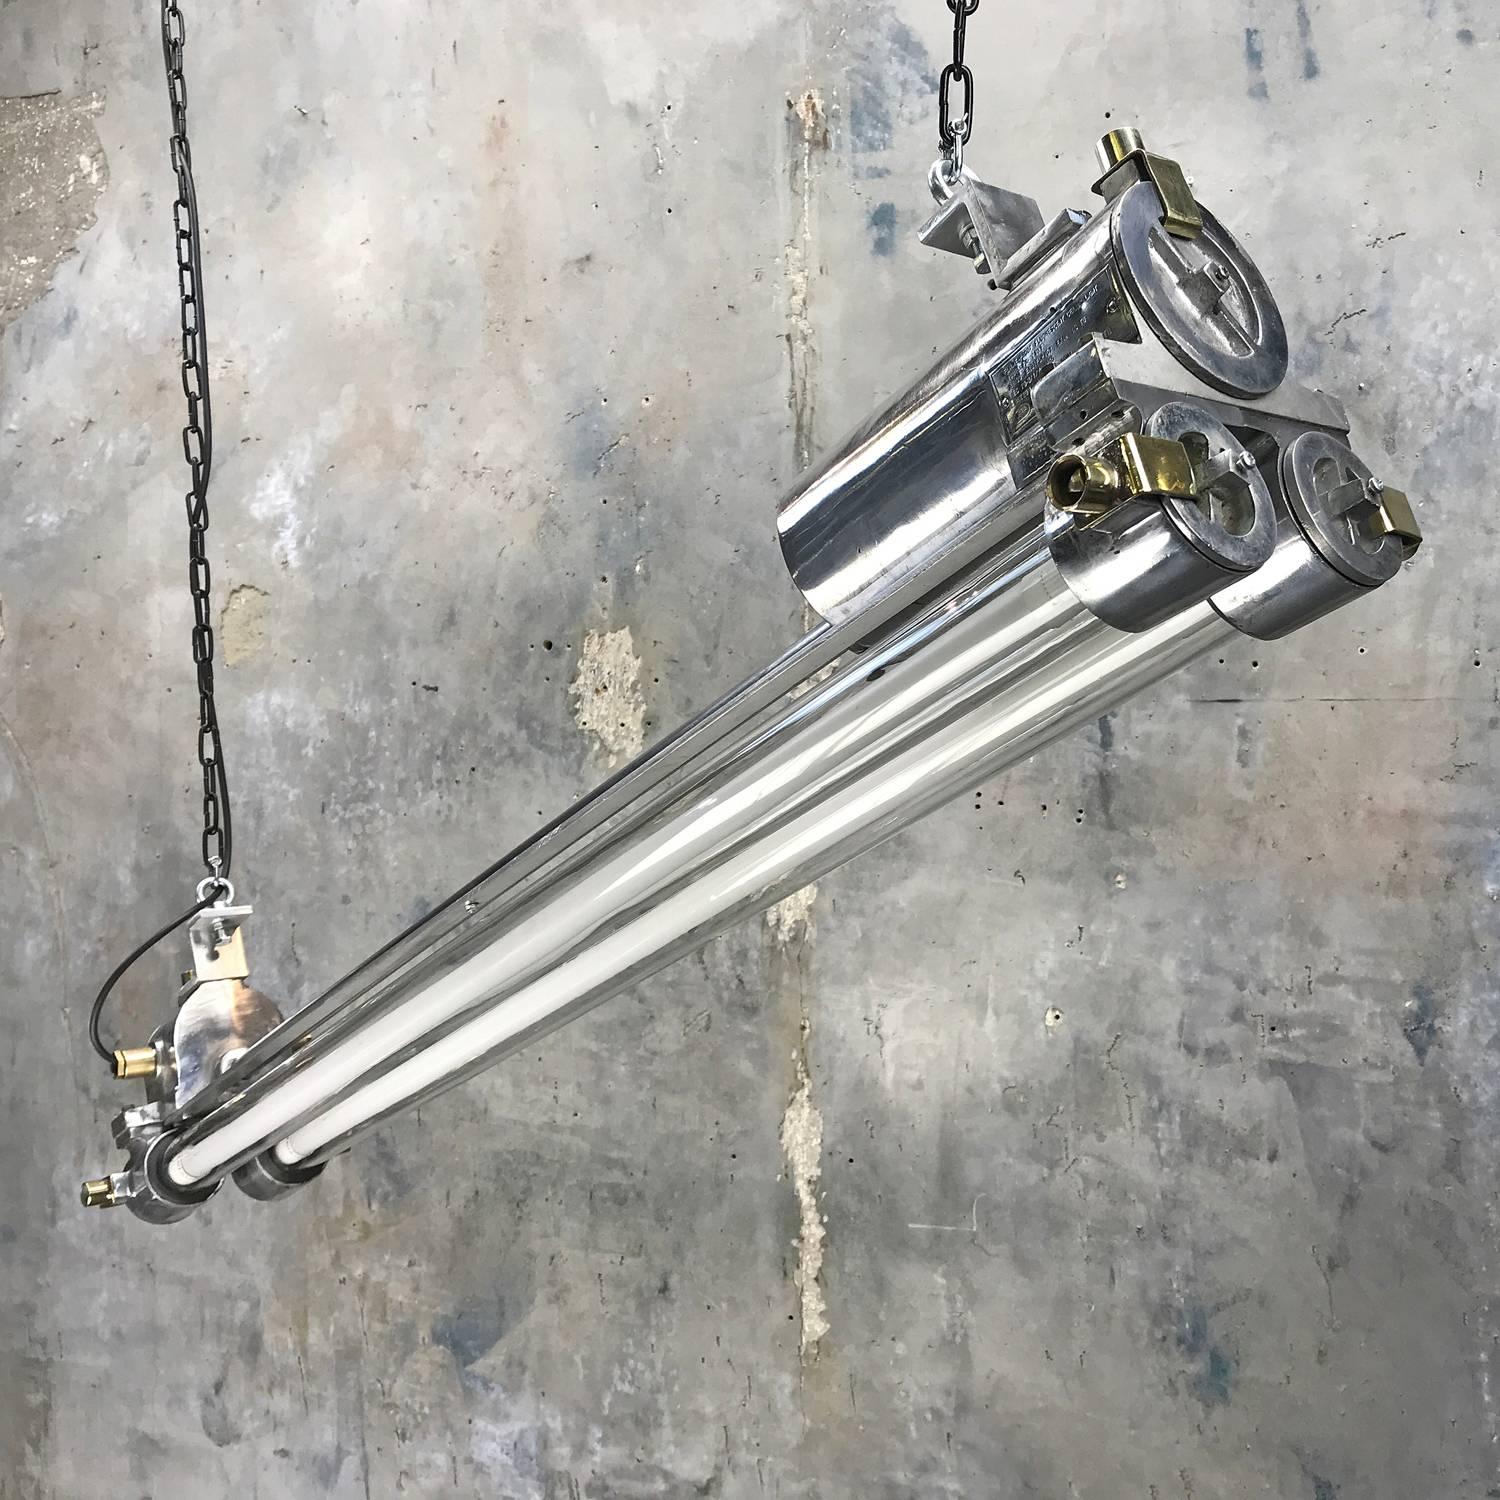 Original item salvaged from super tankers and military vessels and restored to the original specification and modified with LED tubes

The main body is cast aluminium and with steel and brass fittings which are polished in house to a mirror lustre,